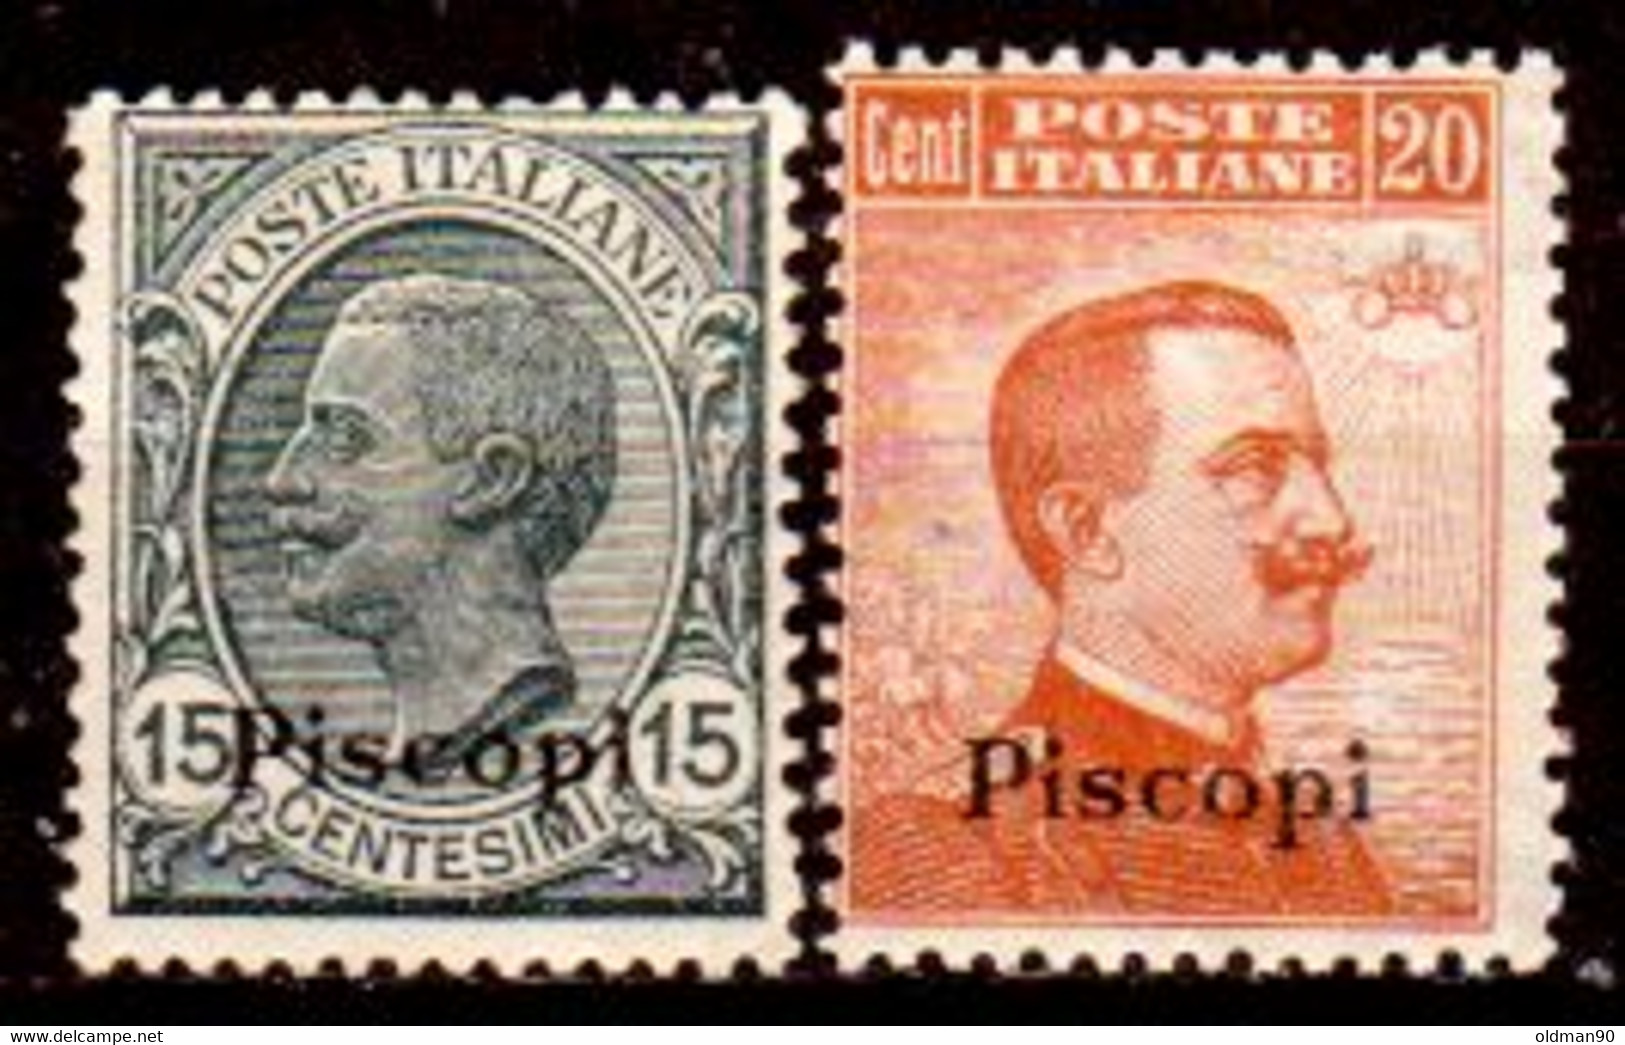 Egeo-OS-321- Piscopi: Original Stamps And Overprint 1921-22 (++) MNH - Quality In Your Opinion. - Egée (Piscopi)